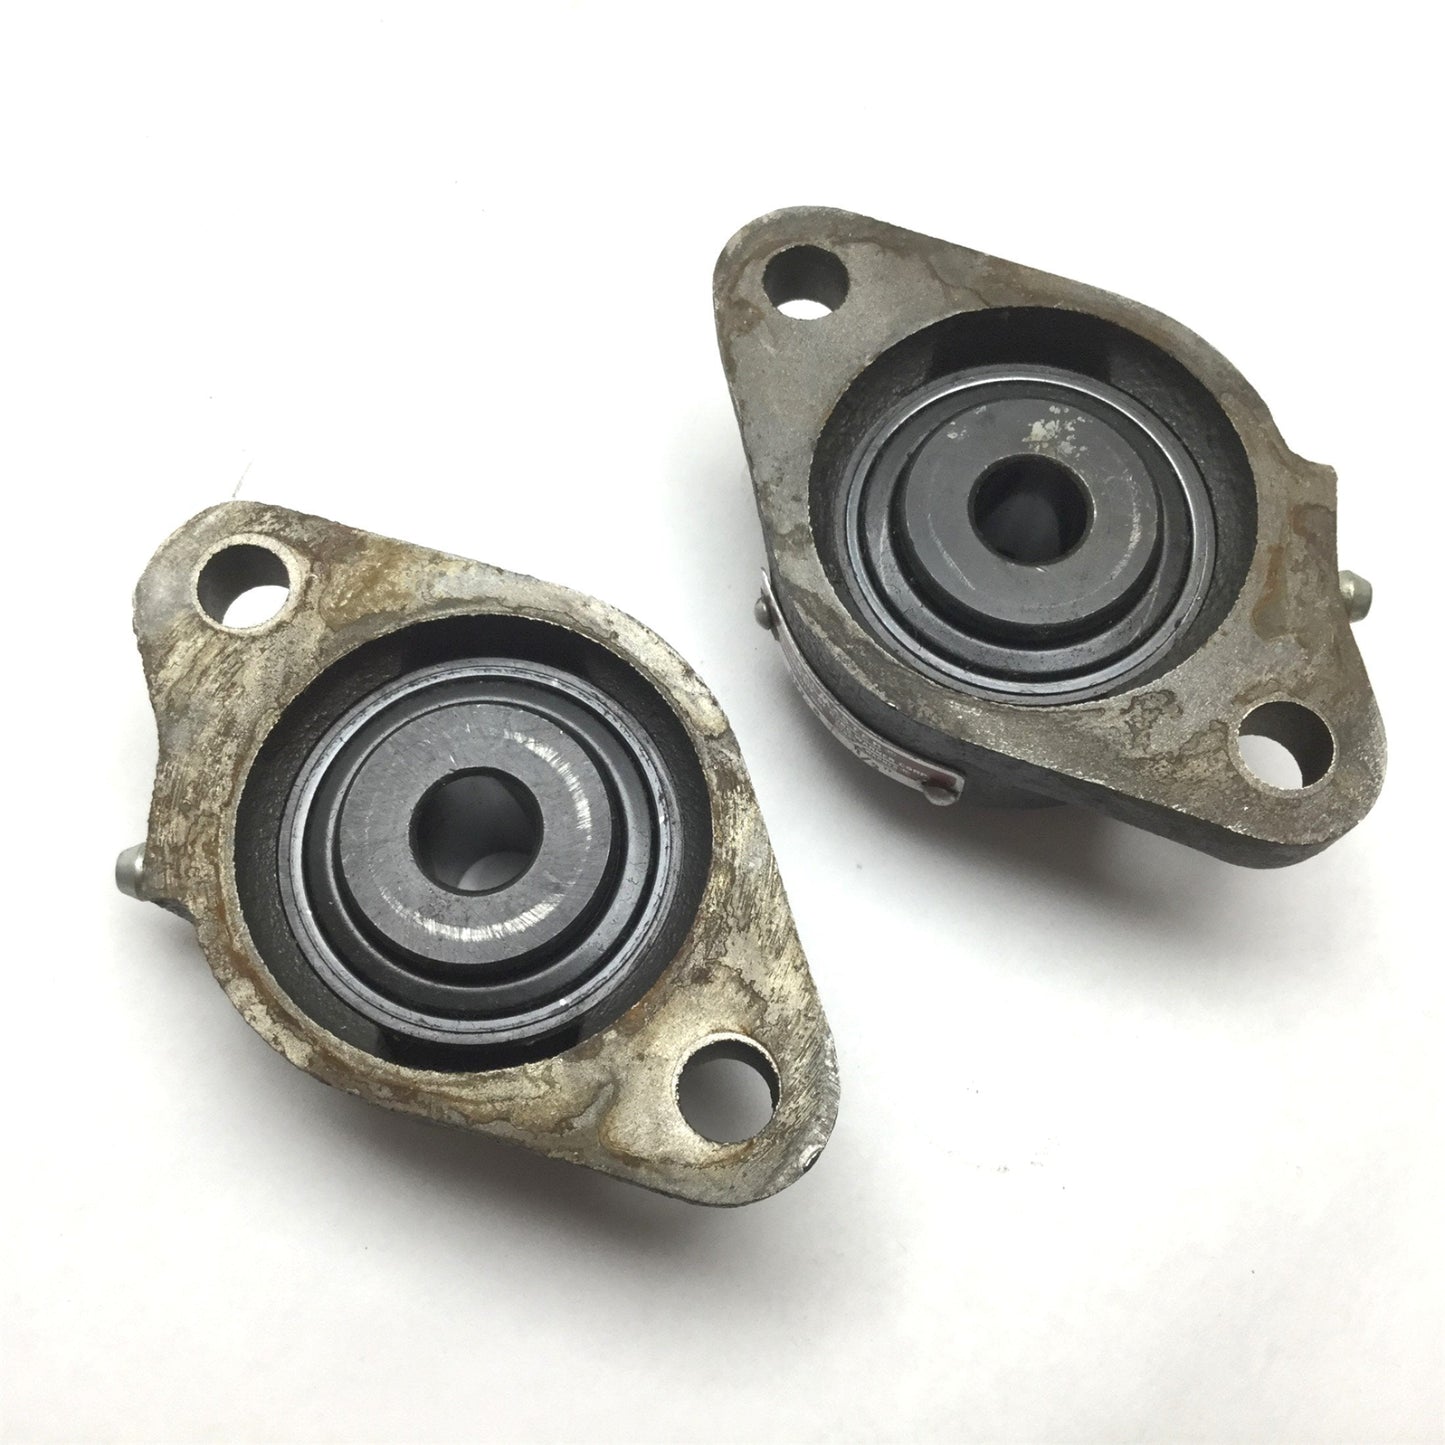 Used Lot of 2 Sealmaster SFT-8 2-Bolt Flange Bearing, Bore: 1/2", Bolt Spacing: 3"